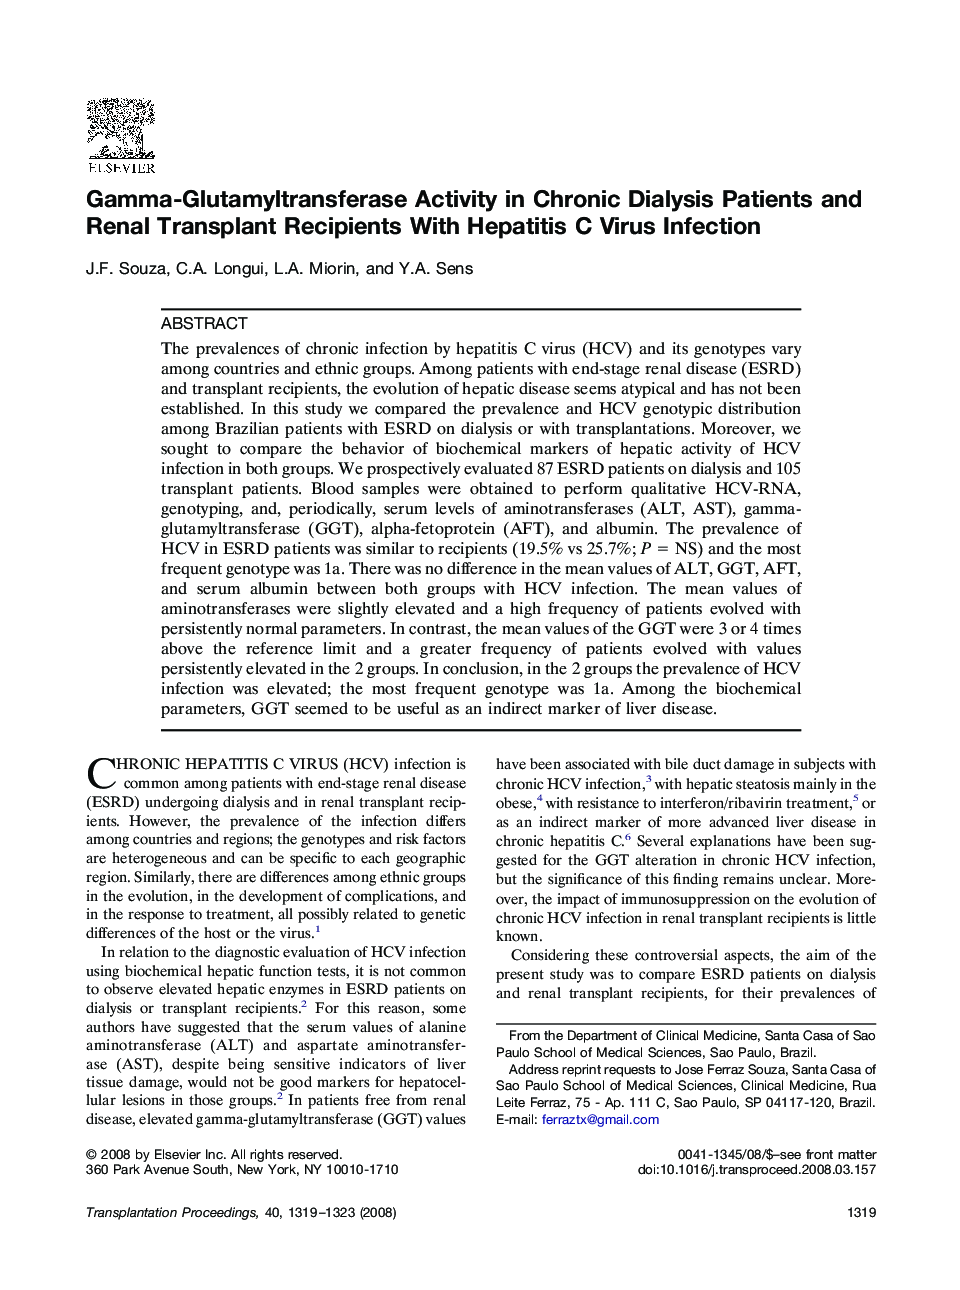 Gamma-Glutamyltransferase Activity in Chronic Dialysis Patients and Renal Transplant Recipients With Hepatitis C Virus Infection